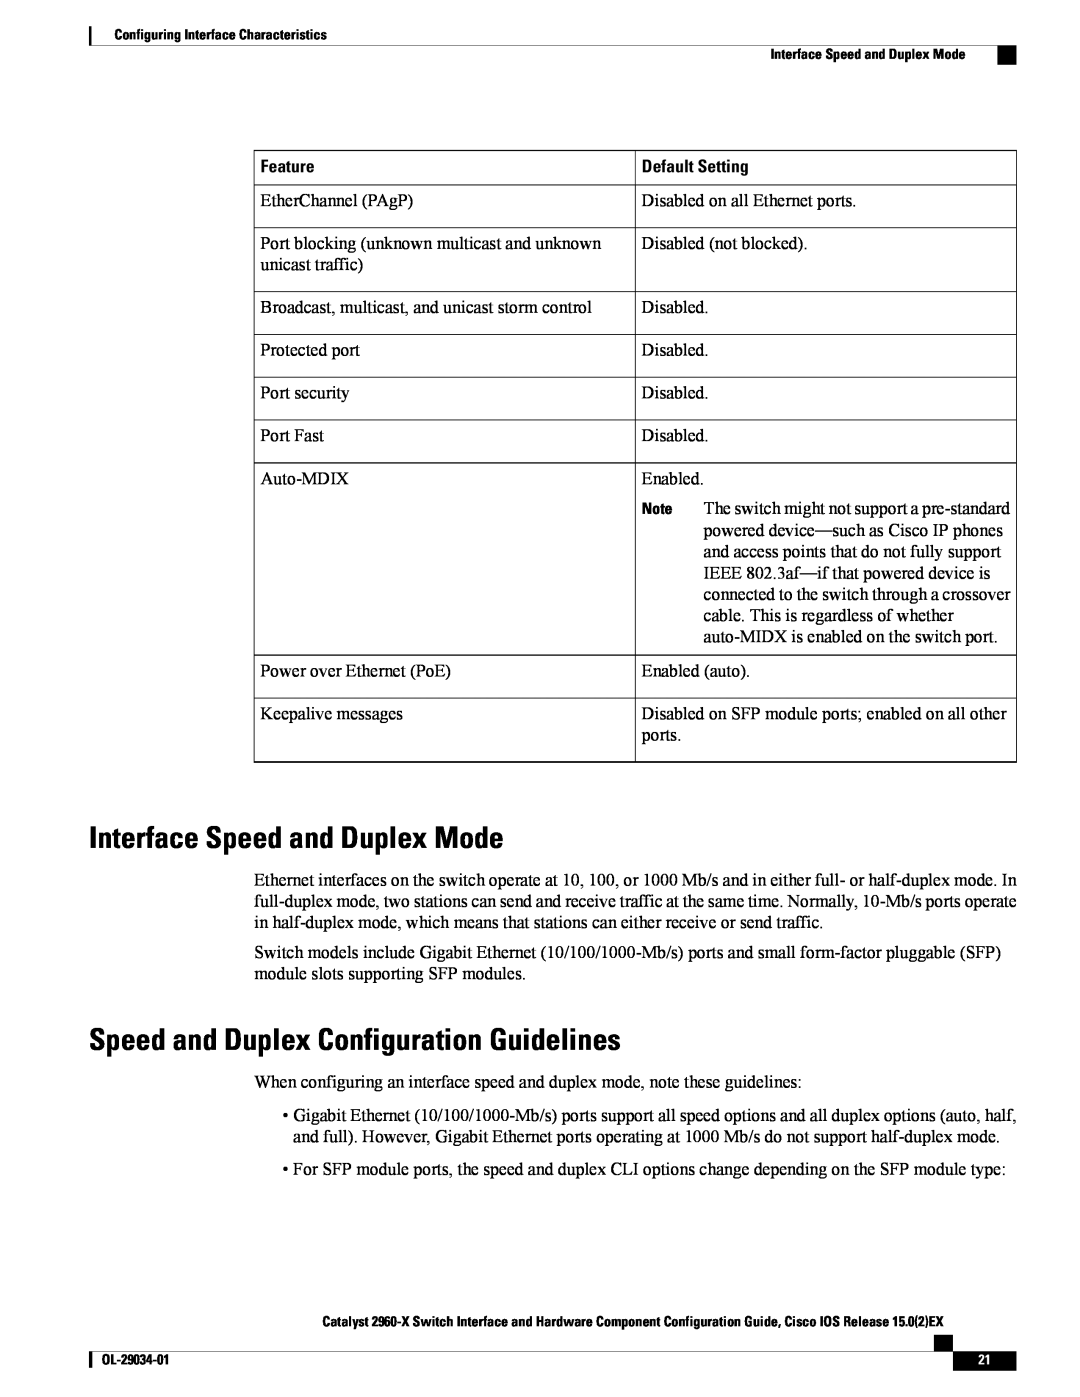 Cisco Systems WSC2960X48TDL manual Interface Speed and Duplex Mode, Speed and Duplex Configuration Guidelines, Feature 